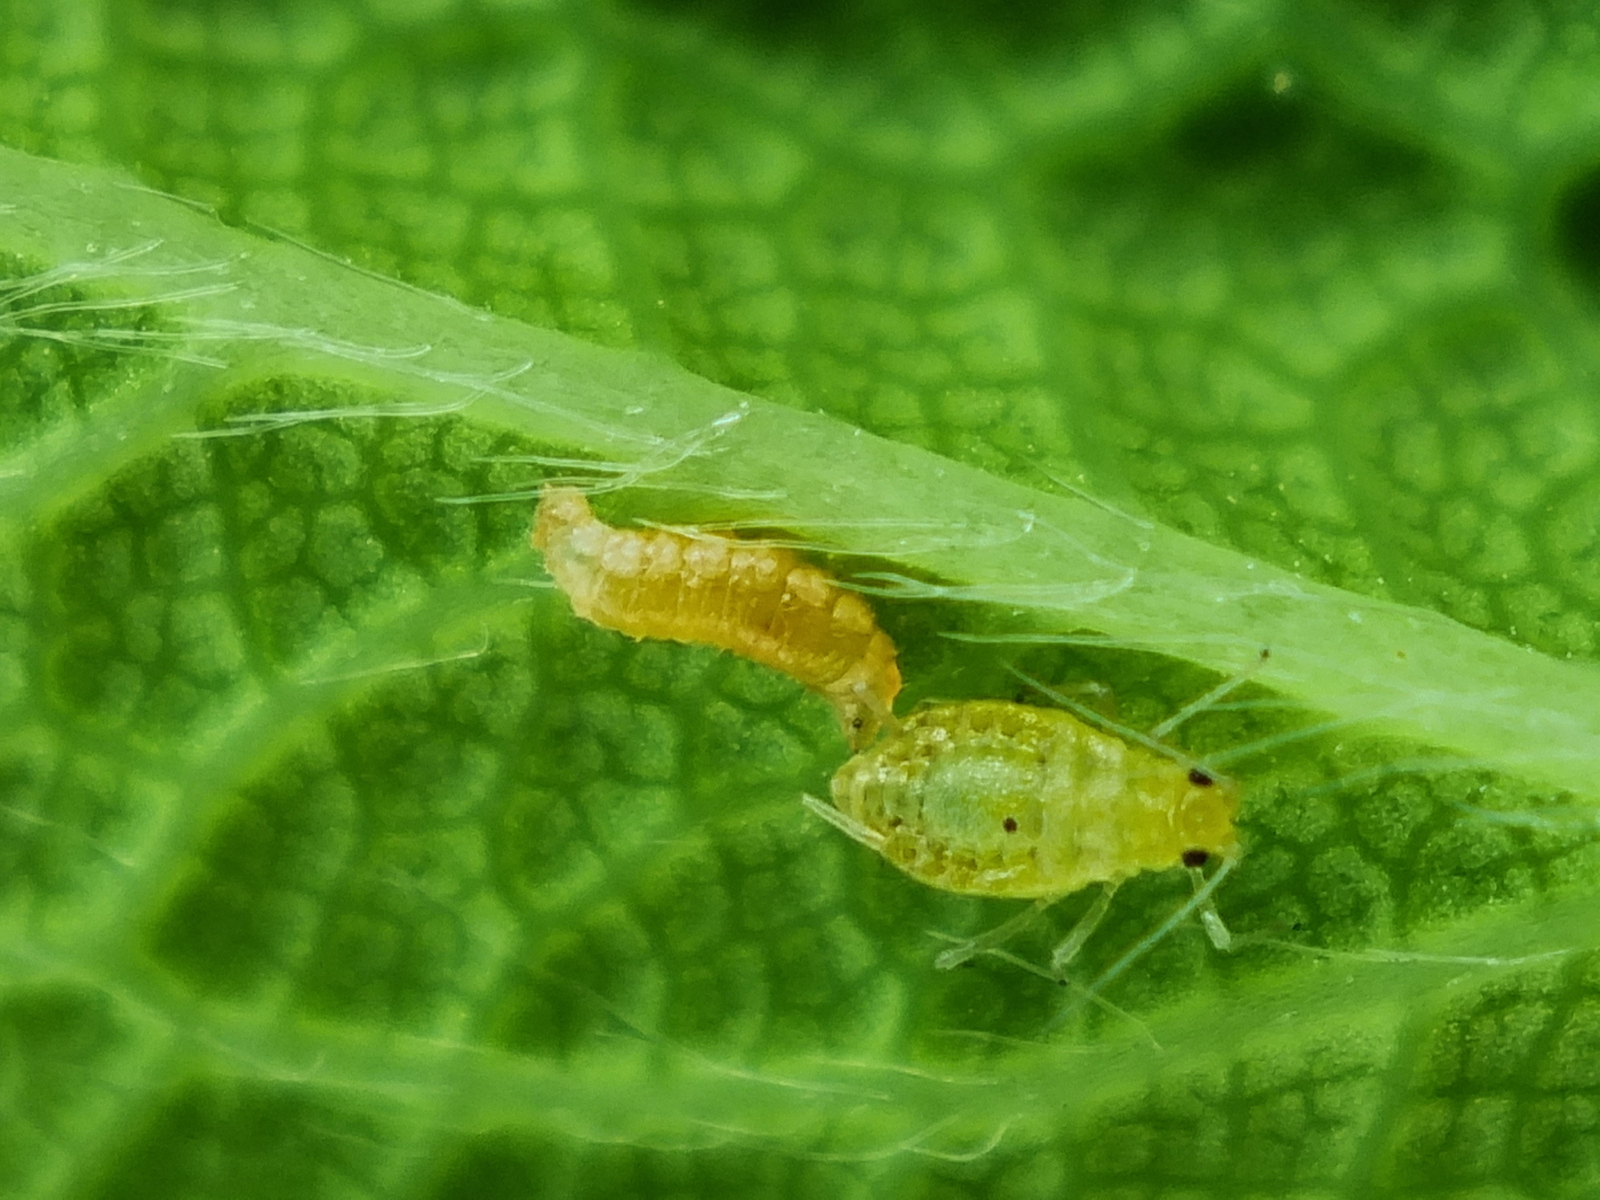 Aphidoletes attacking Aphid